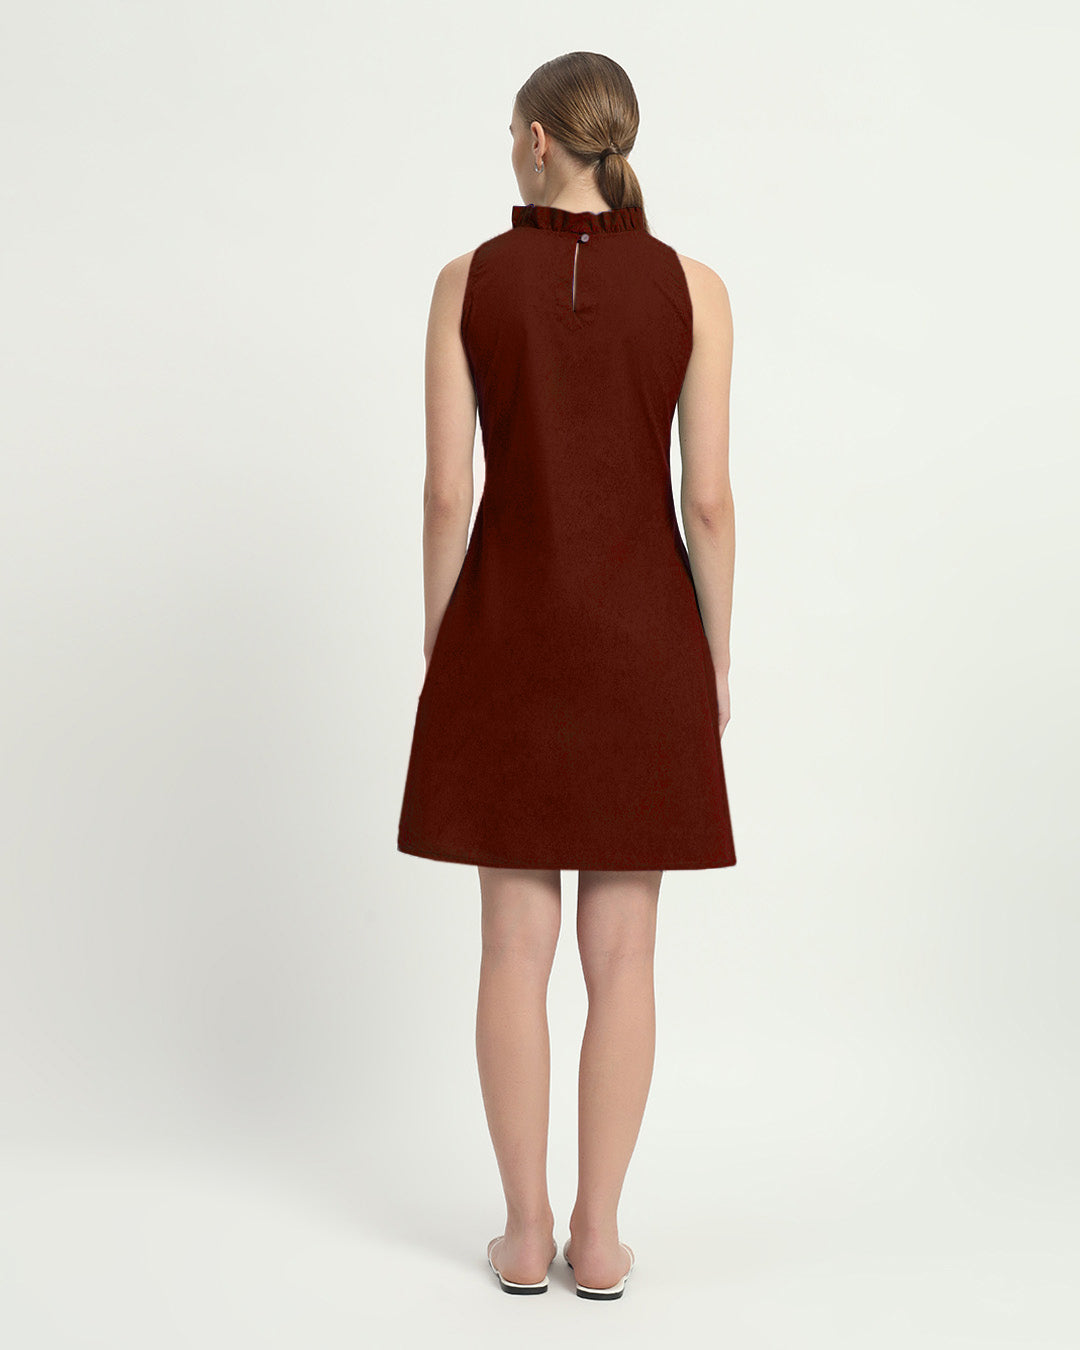 The Angelica Rouge Cotton Dress